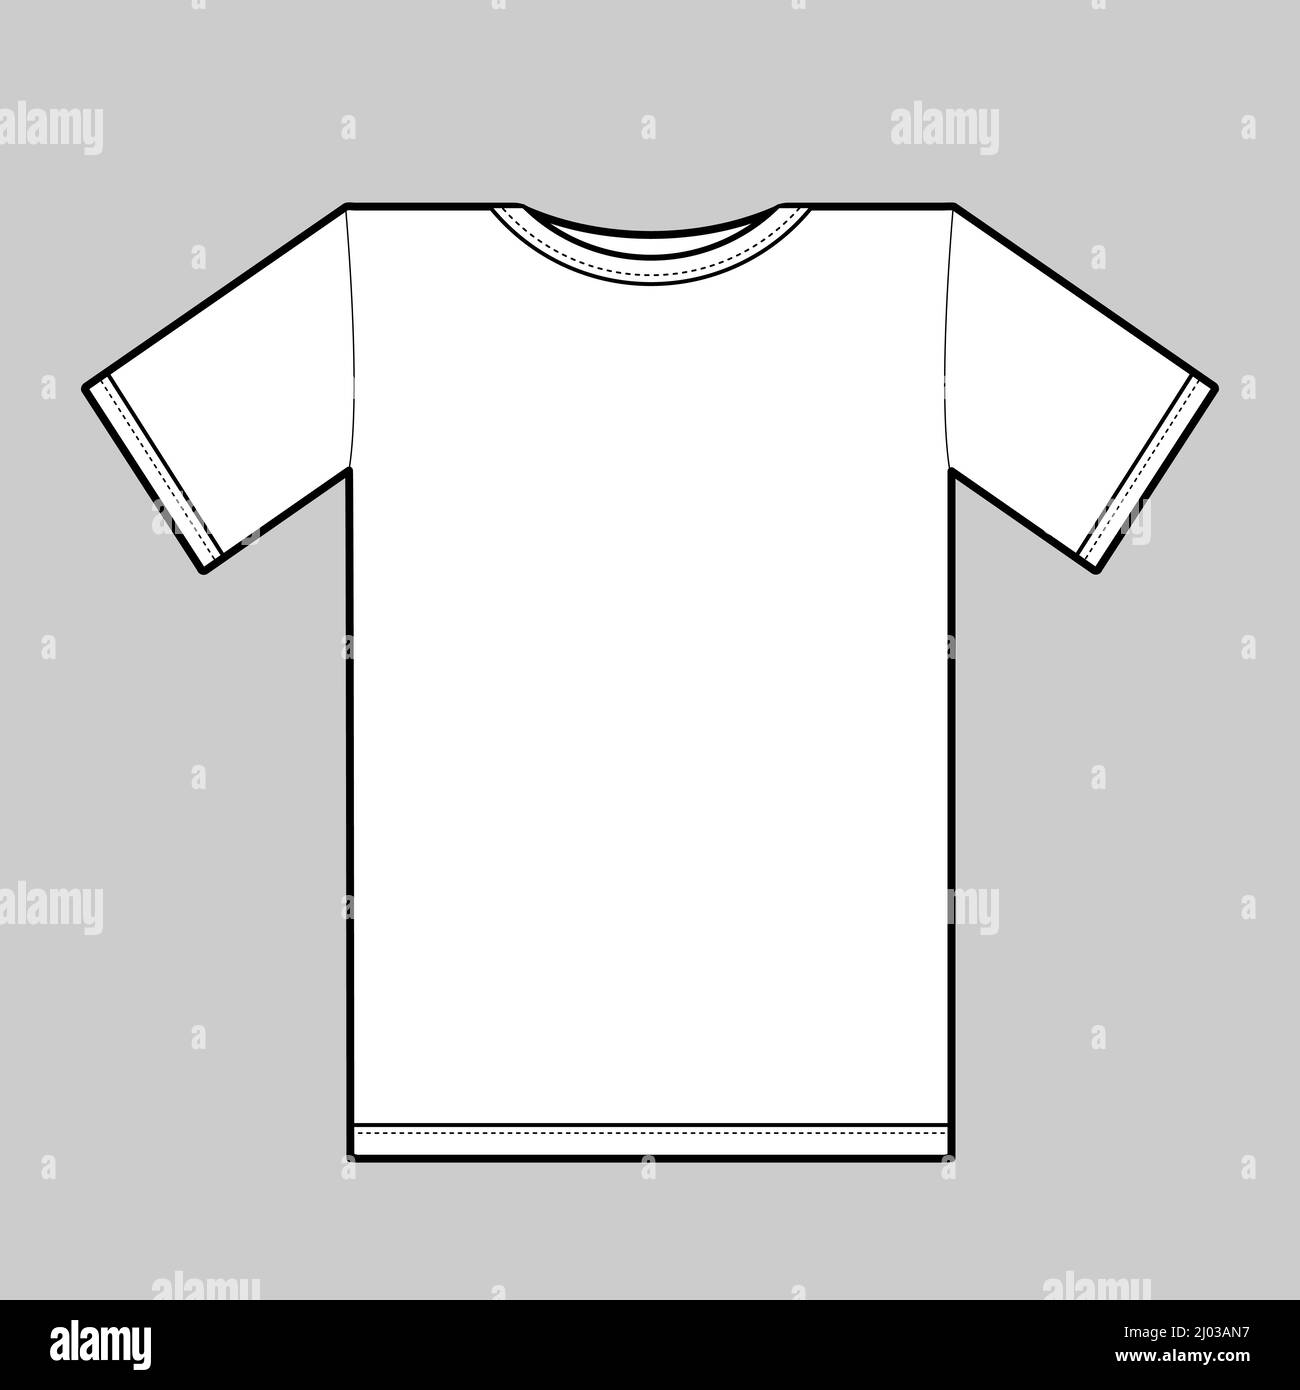 Free Blank Tshirt Templates in Various Designs - Allpicts  Plain white t- shirt, Black and white t shirts, Shirt template